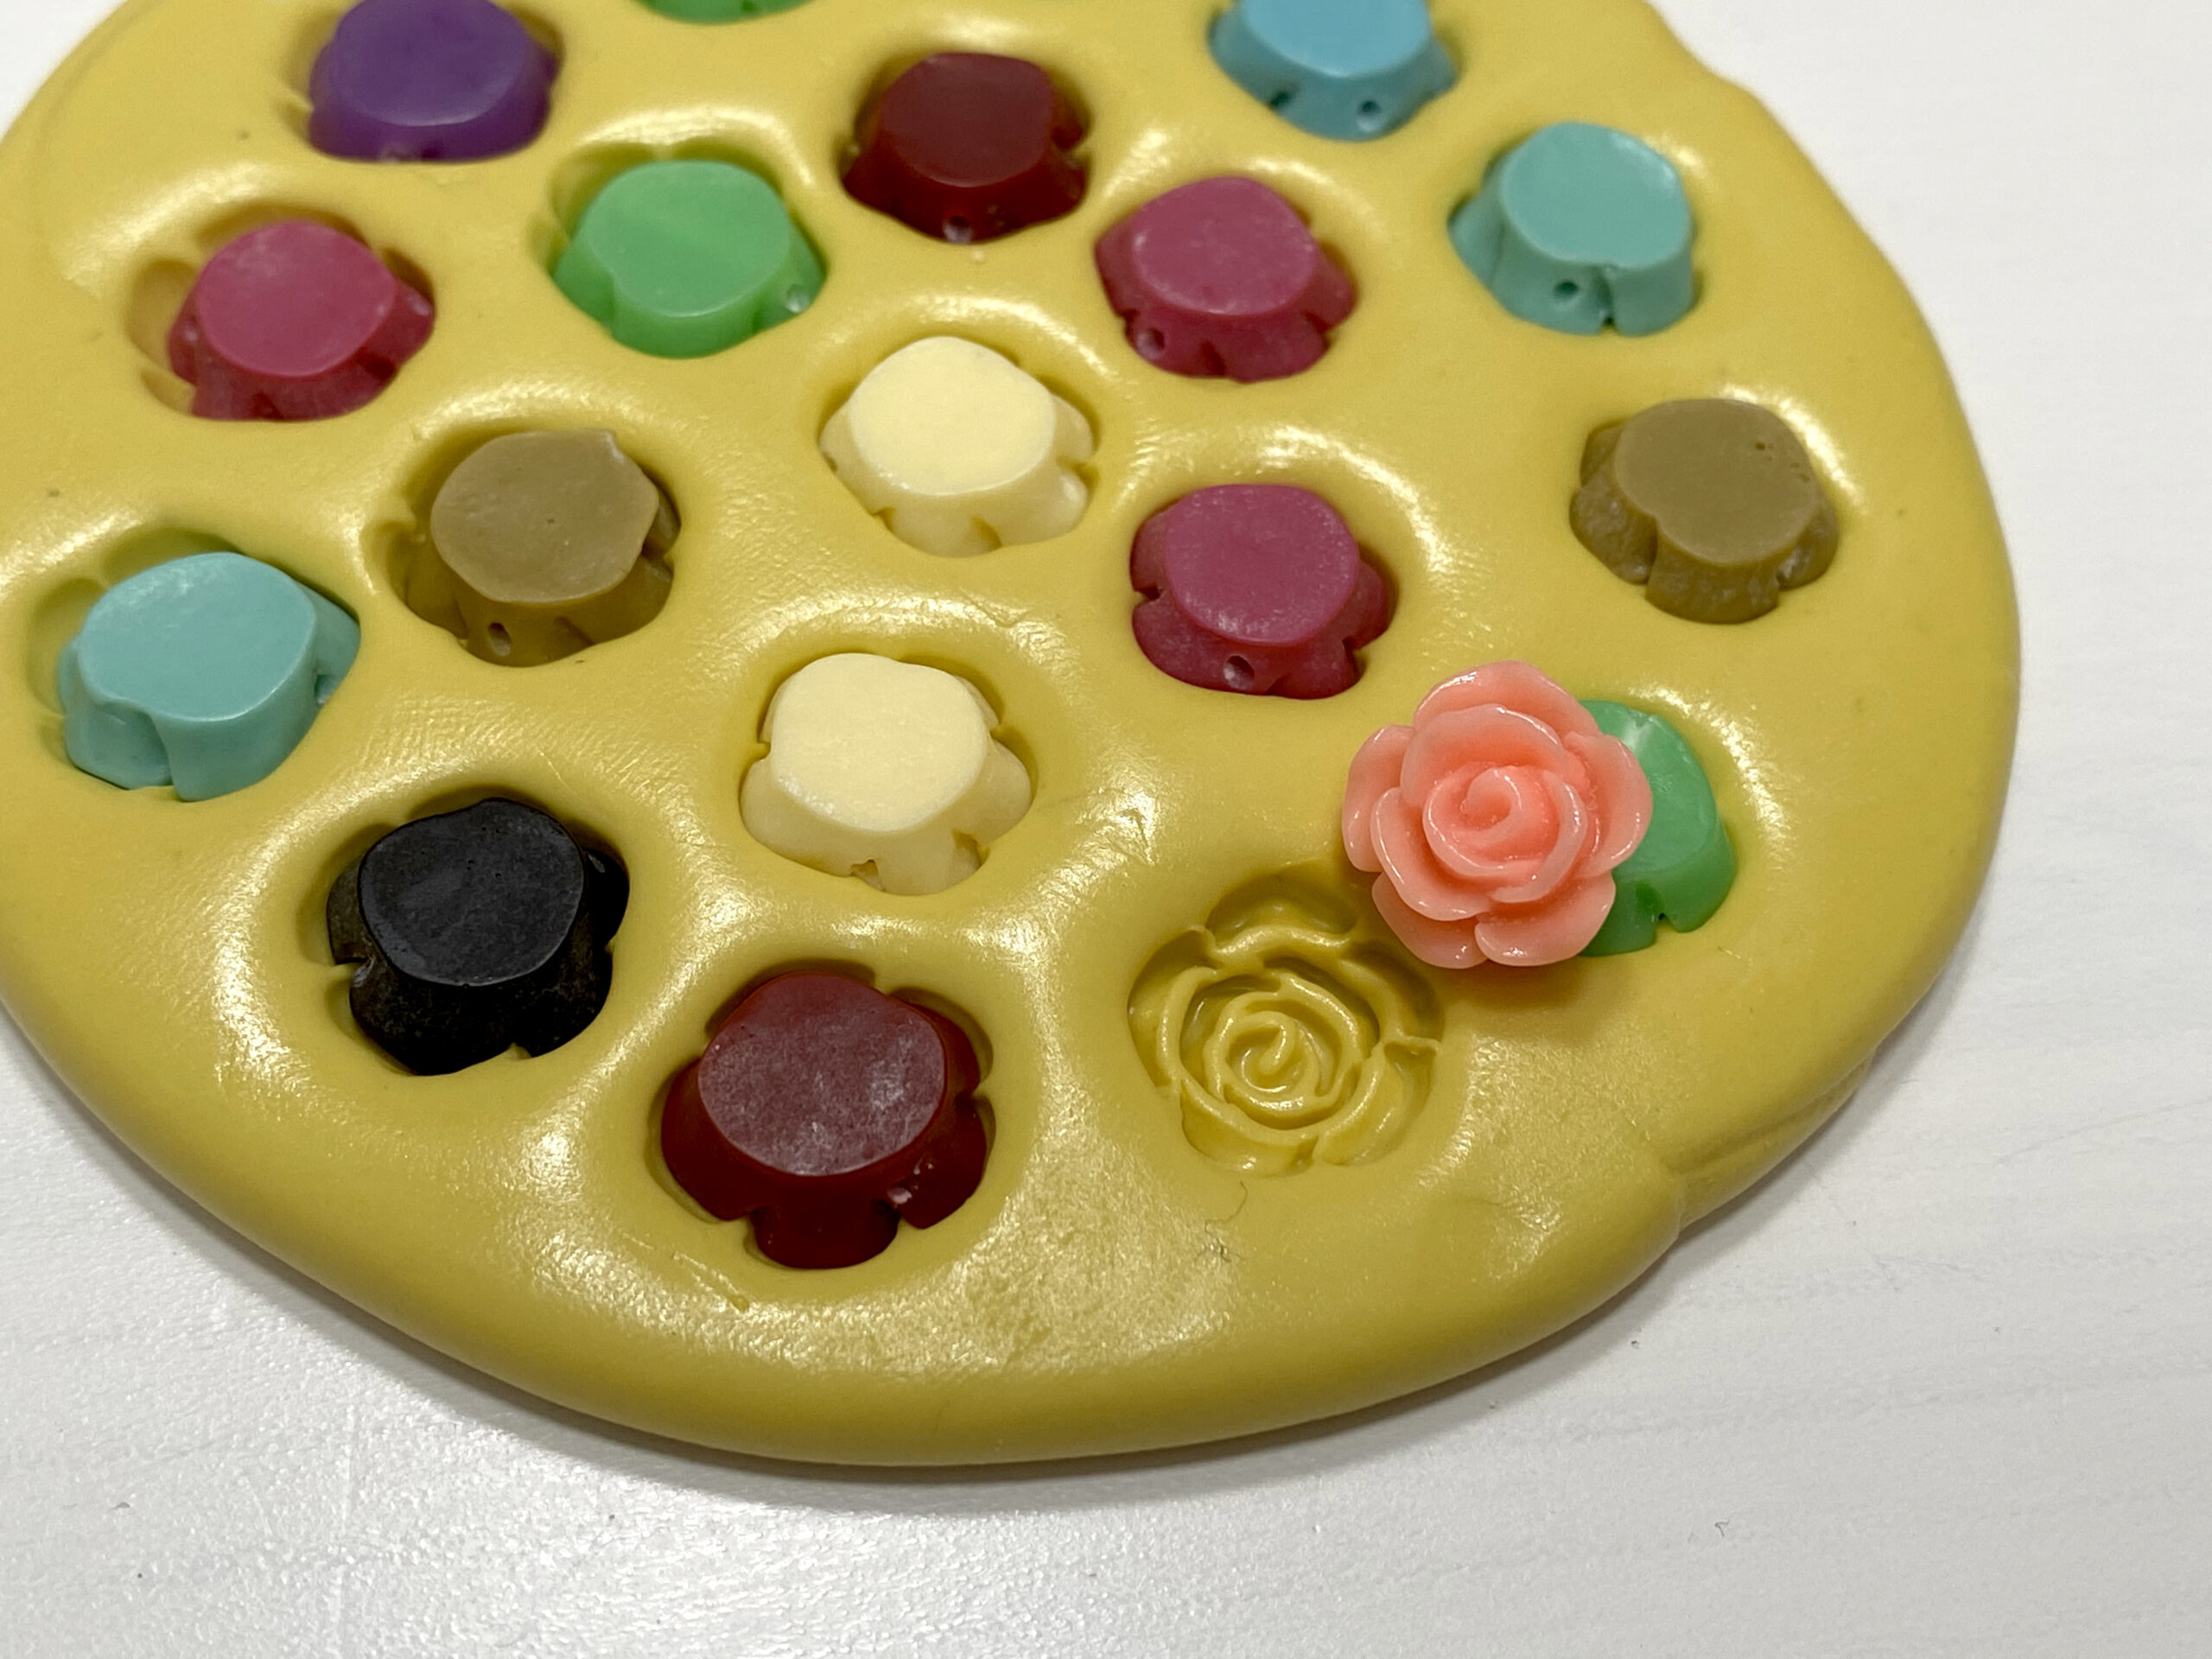 Tips&Tricks: How to use silicone molds for polymer clay projects